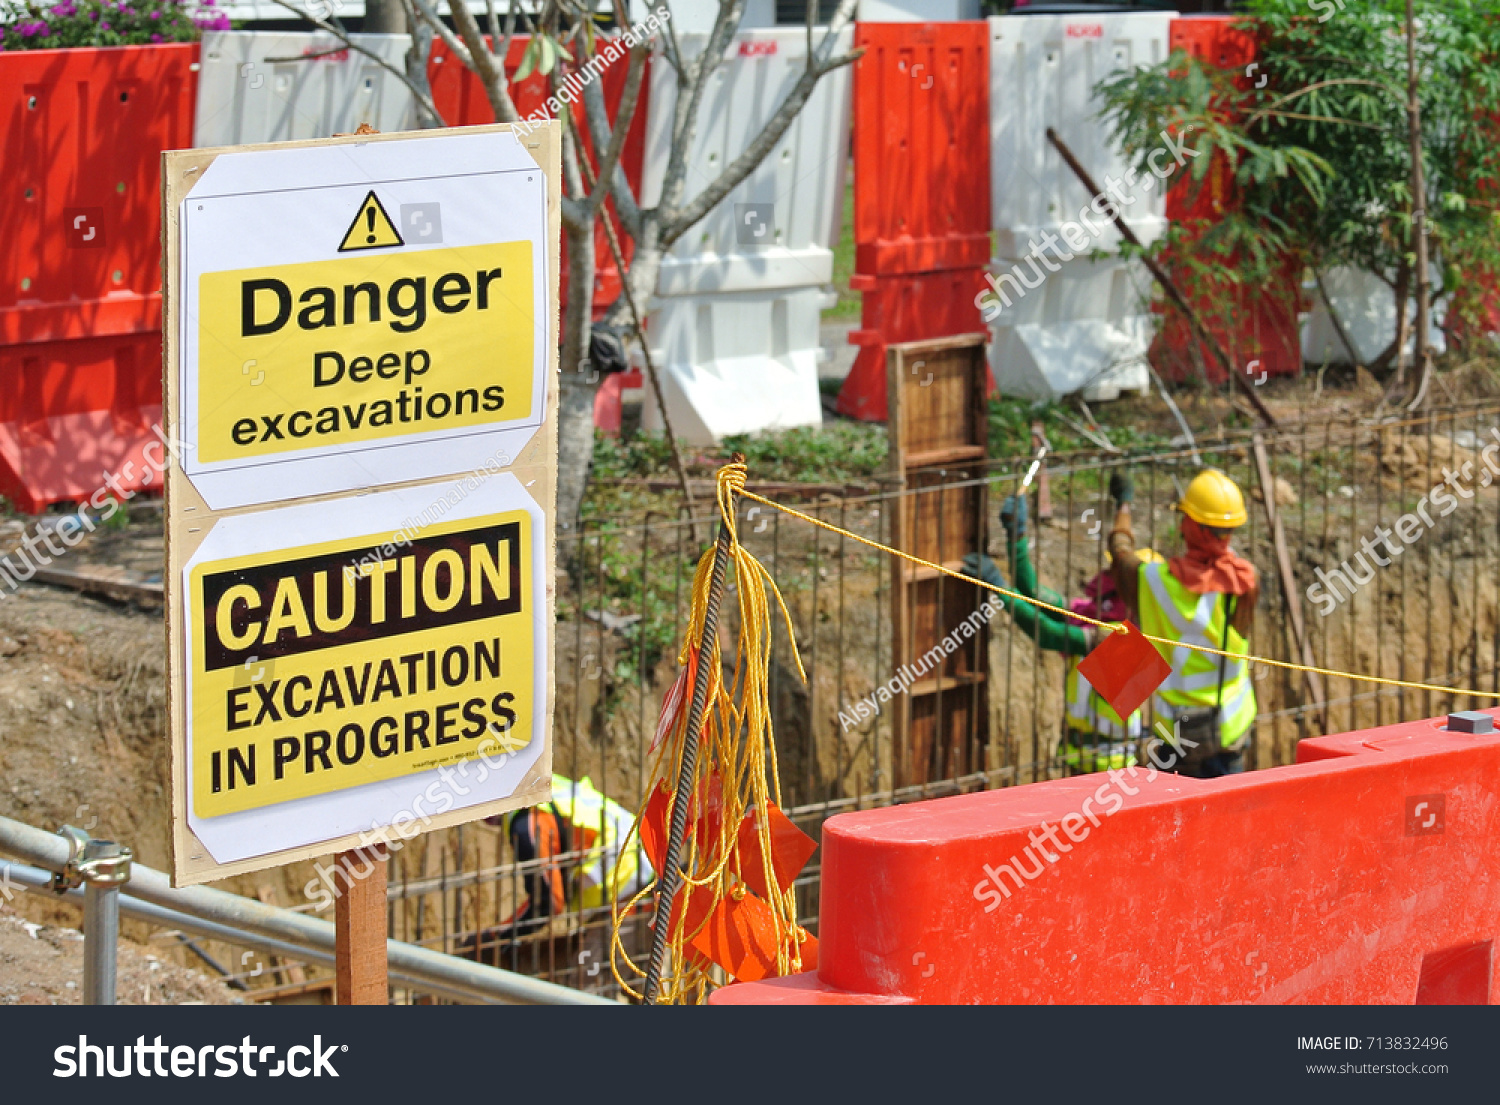 Safety Signage Danger Deep Excavation Construction Objects Stock Image 713832496